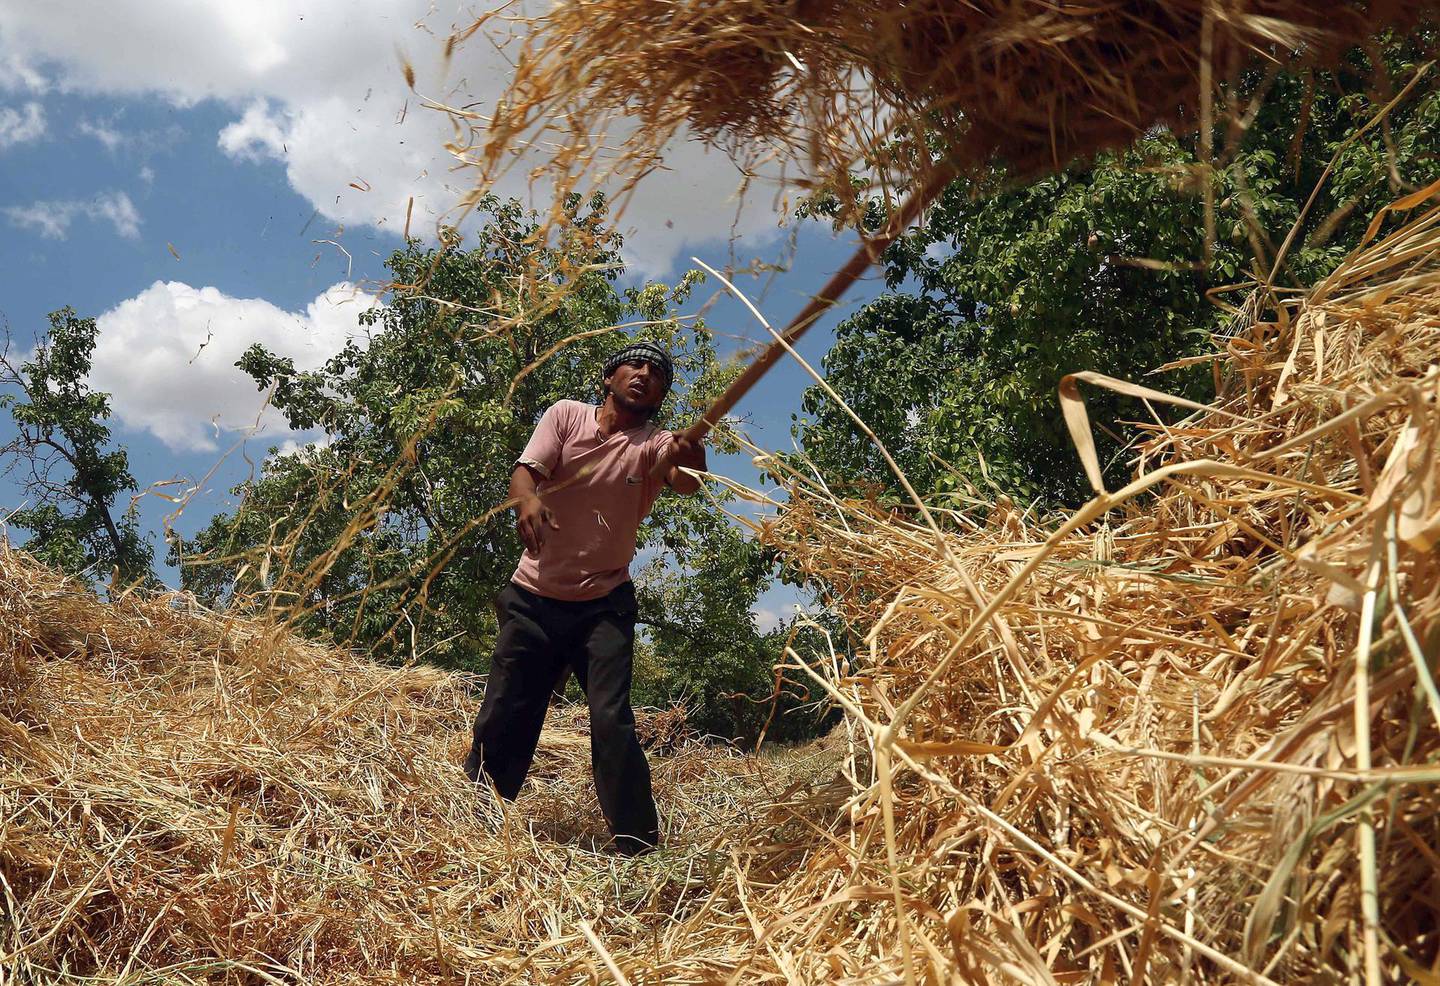 DAMASCUS, SYRIA - MAY 31: A Syrian farmer harvests wheat as Assad Regime Forces' airstrikes continued for three years at Eastern Ghouta in Damascus, Syria on May 31, 2016. (Photo by Amer Almohibany/Anadolu Agency/Getty Images)